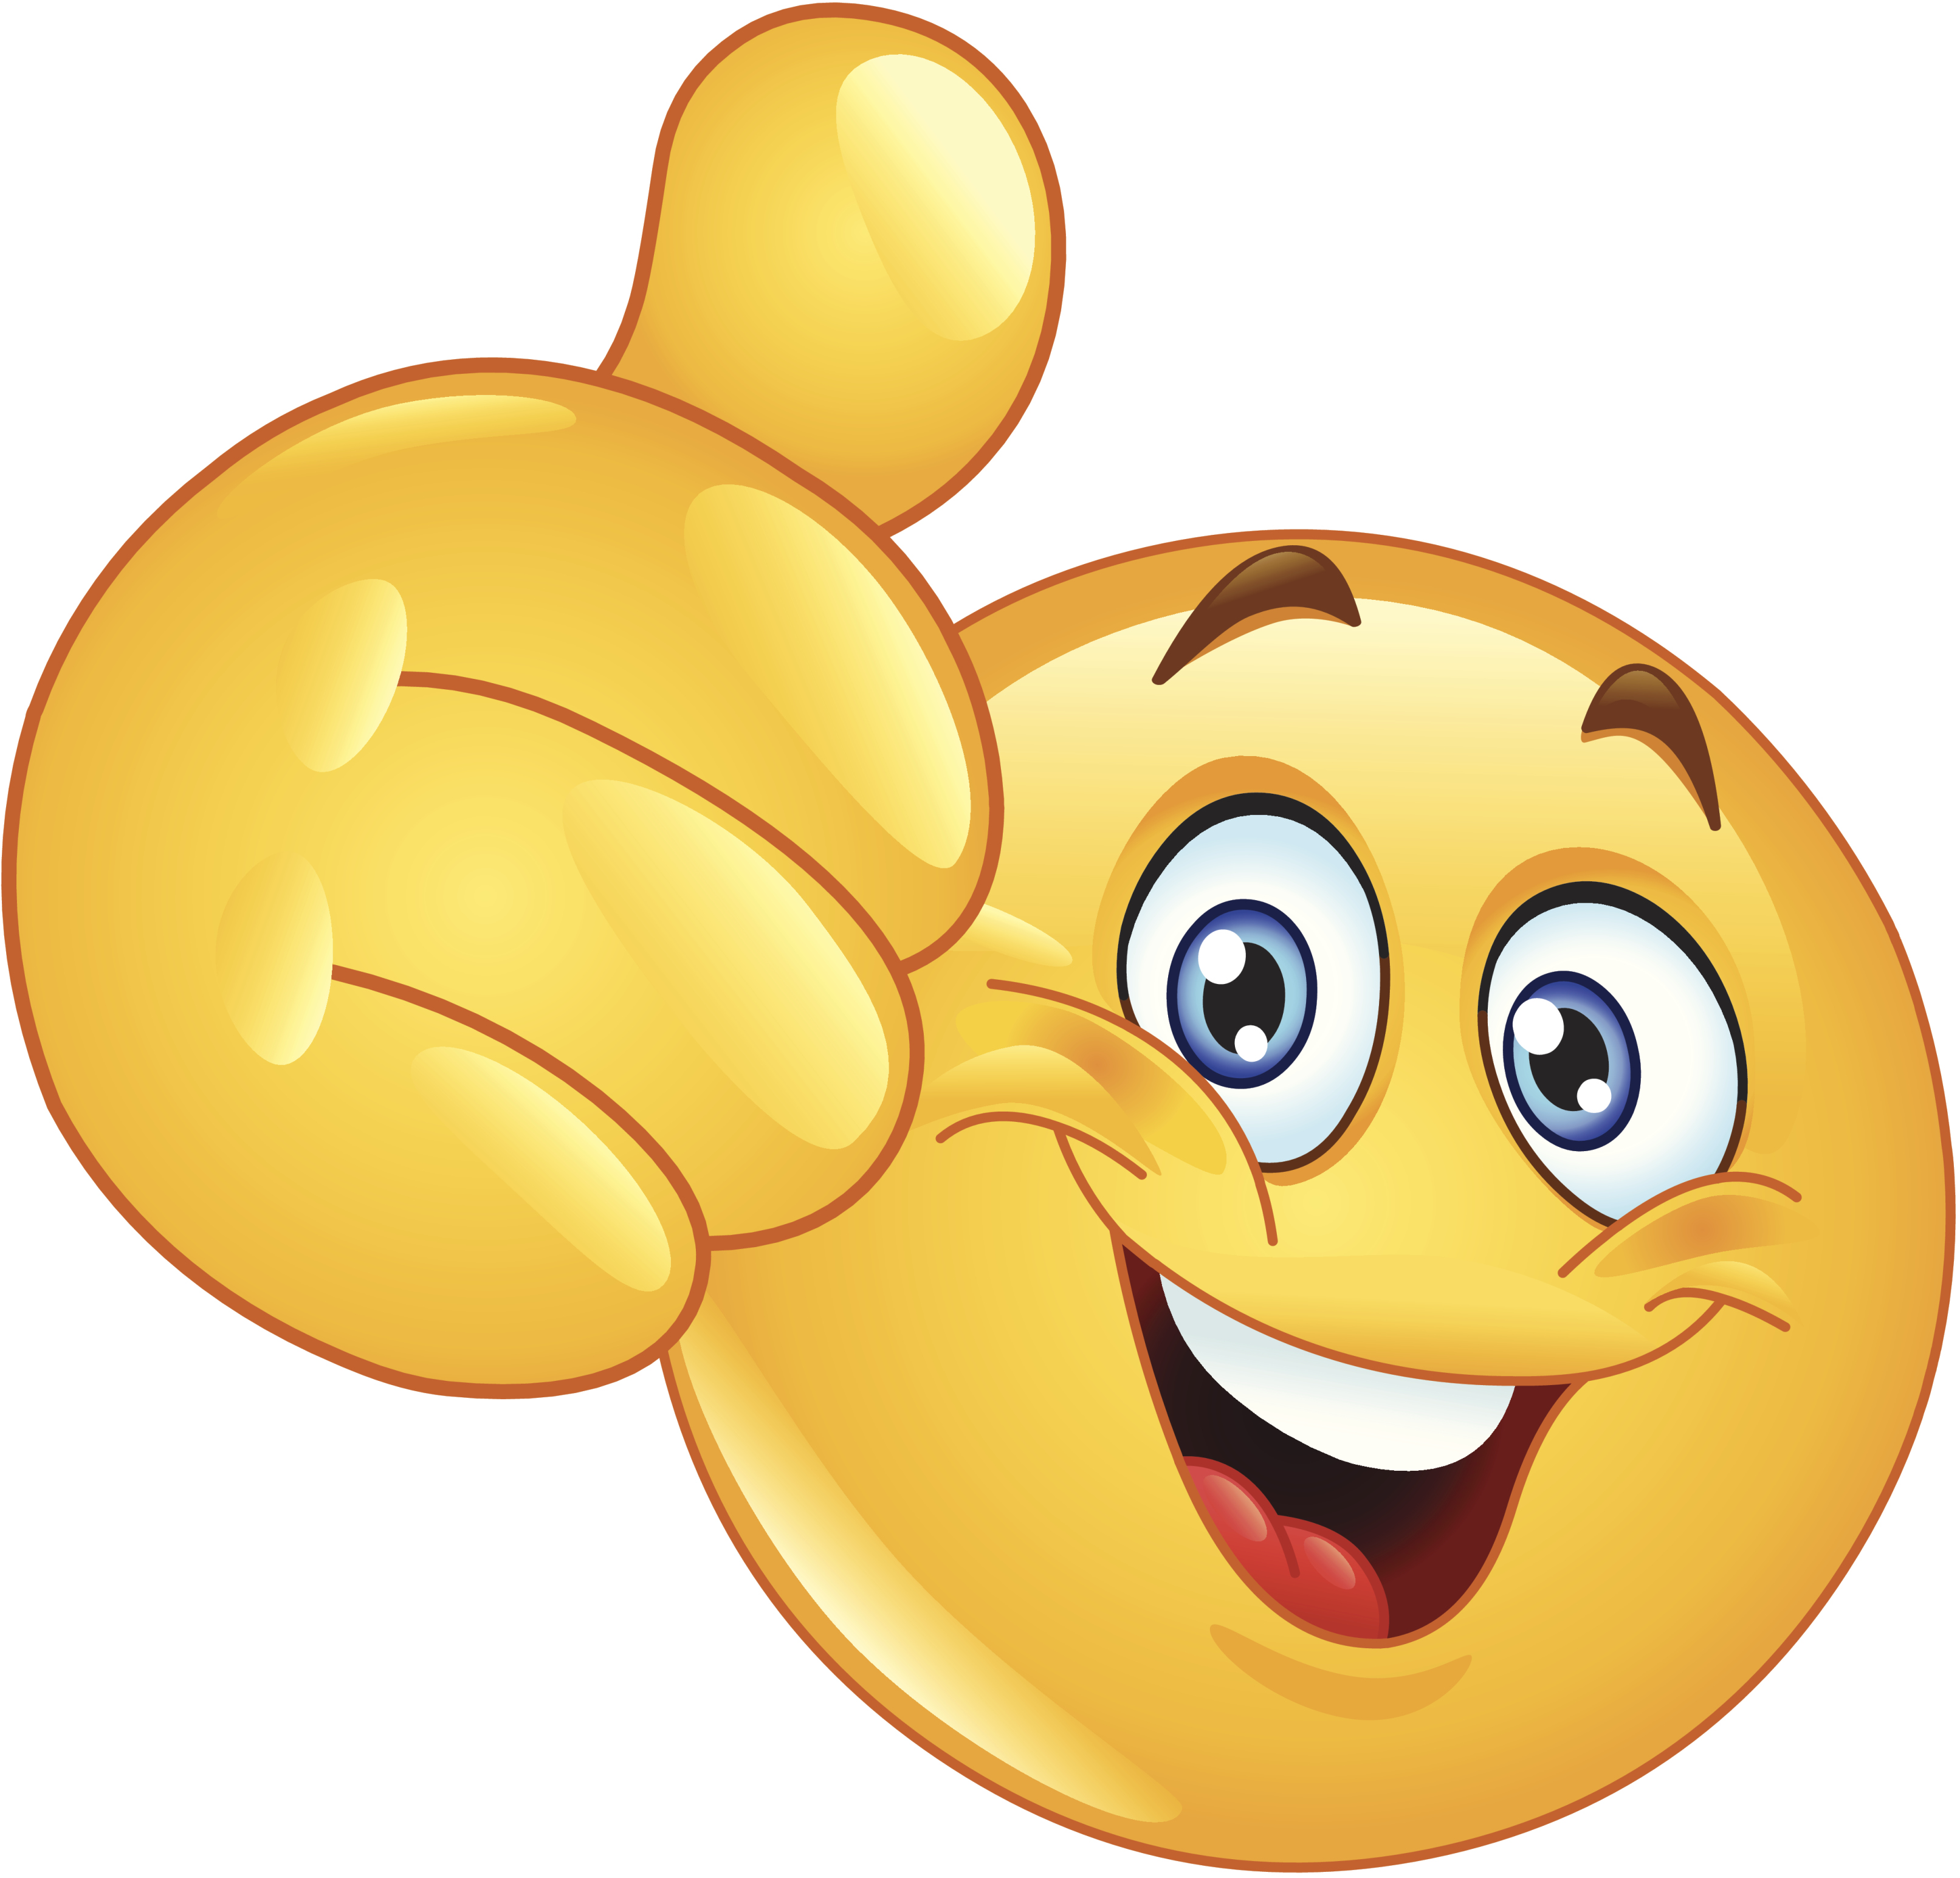 Pics For   Smiley Face Thumbs Up Animation